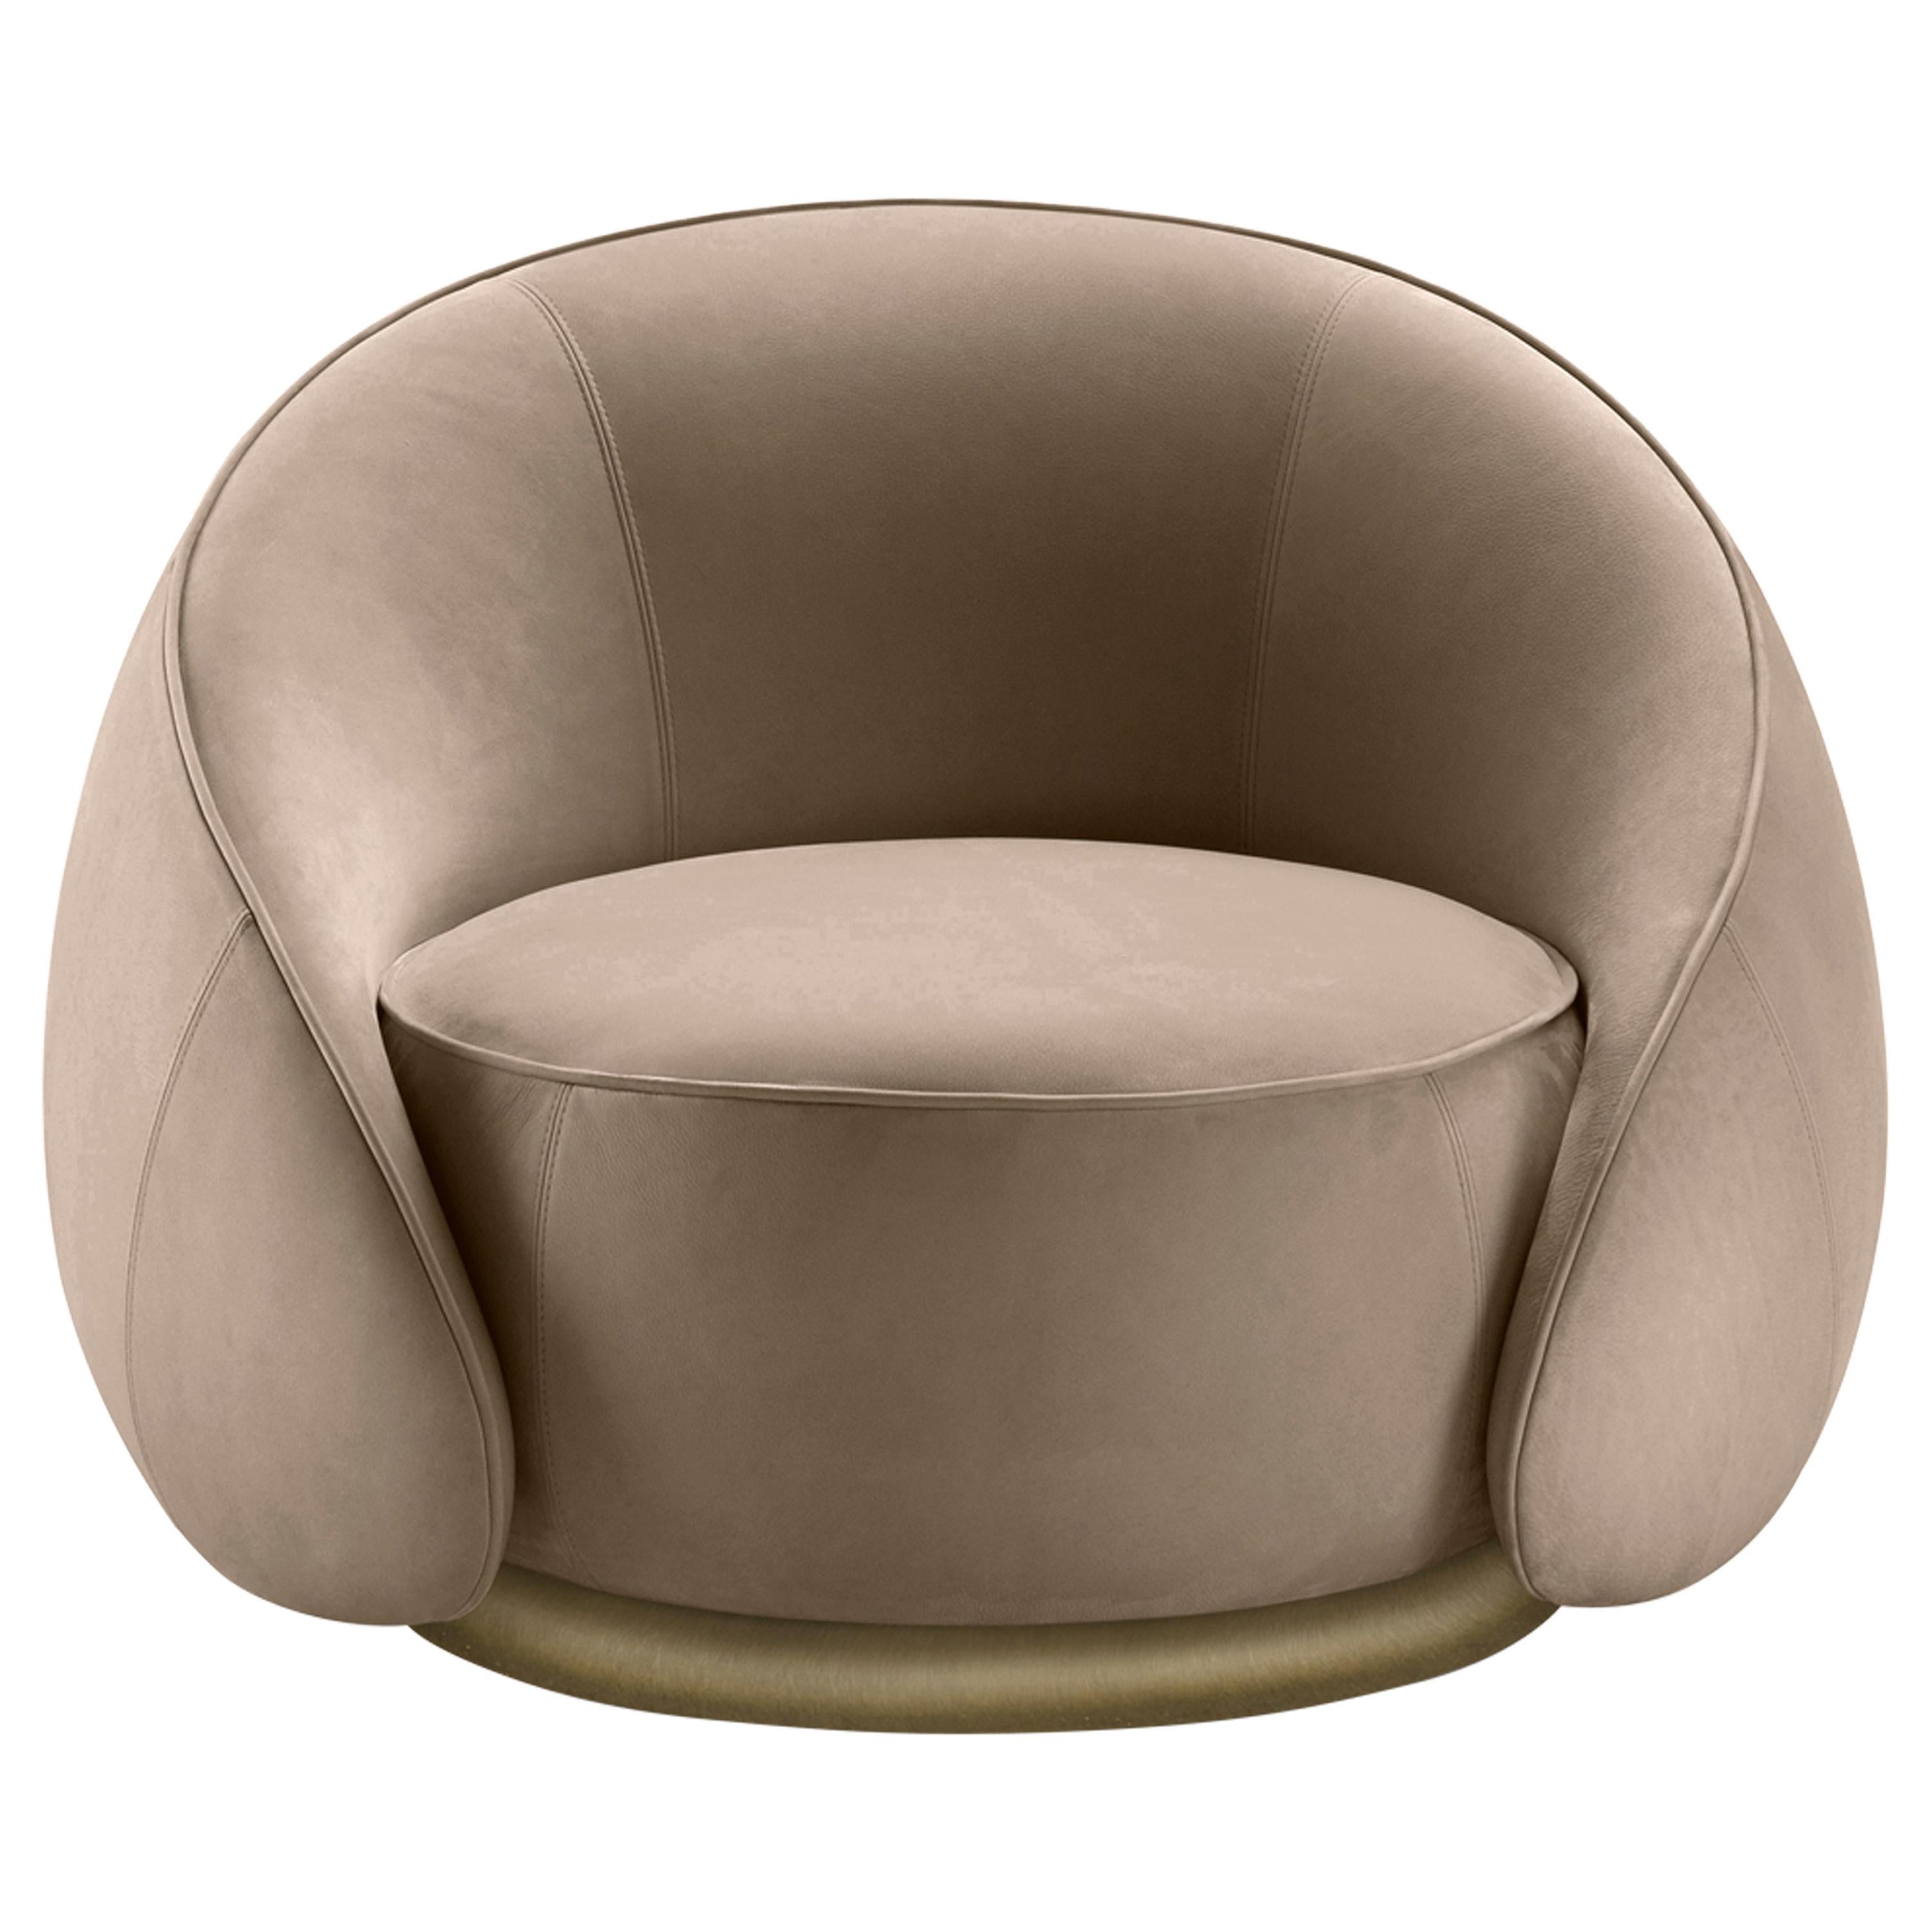 Abbracci Armchair in Beige Leather with Brown Burnished Brass Legs